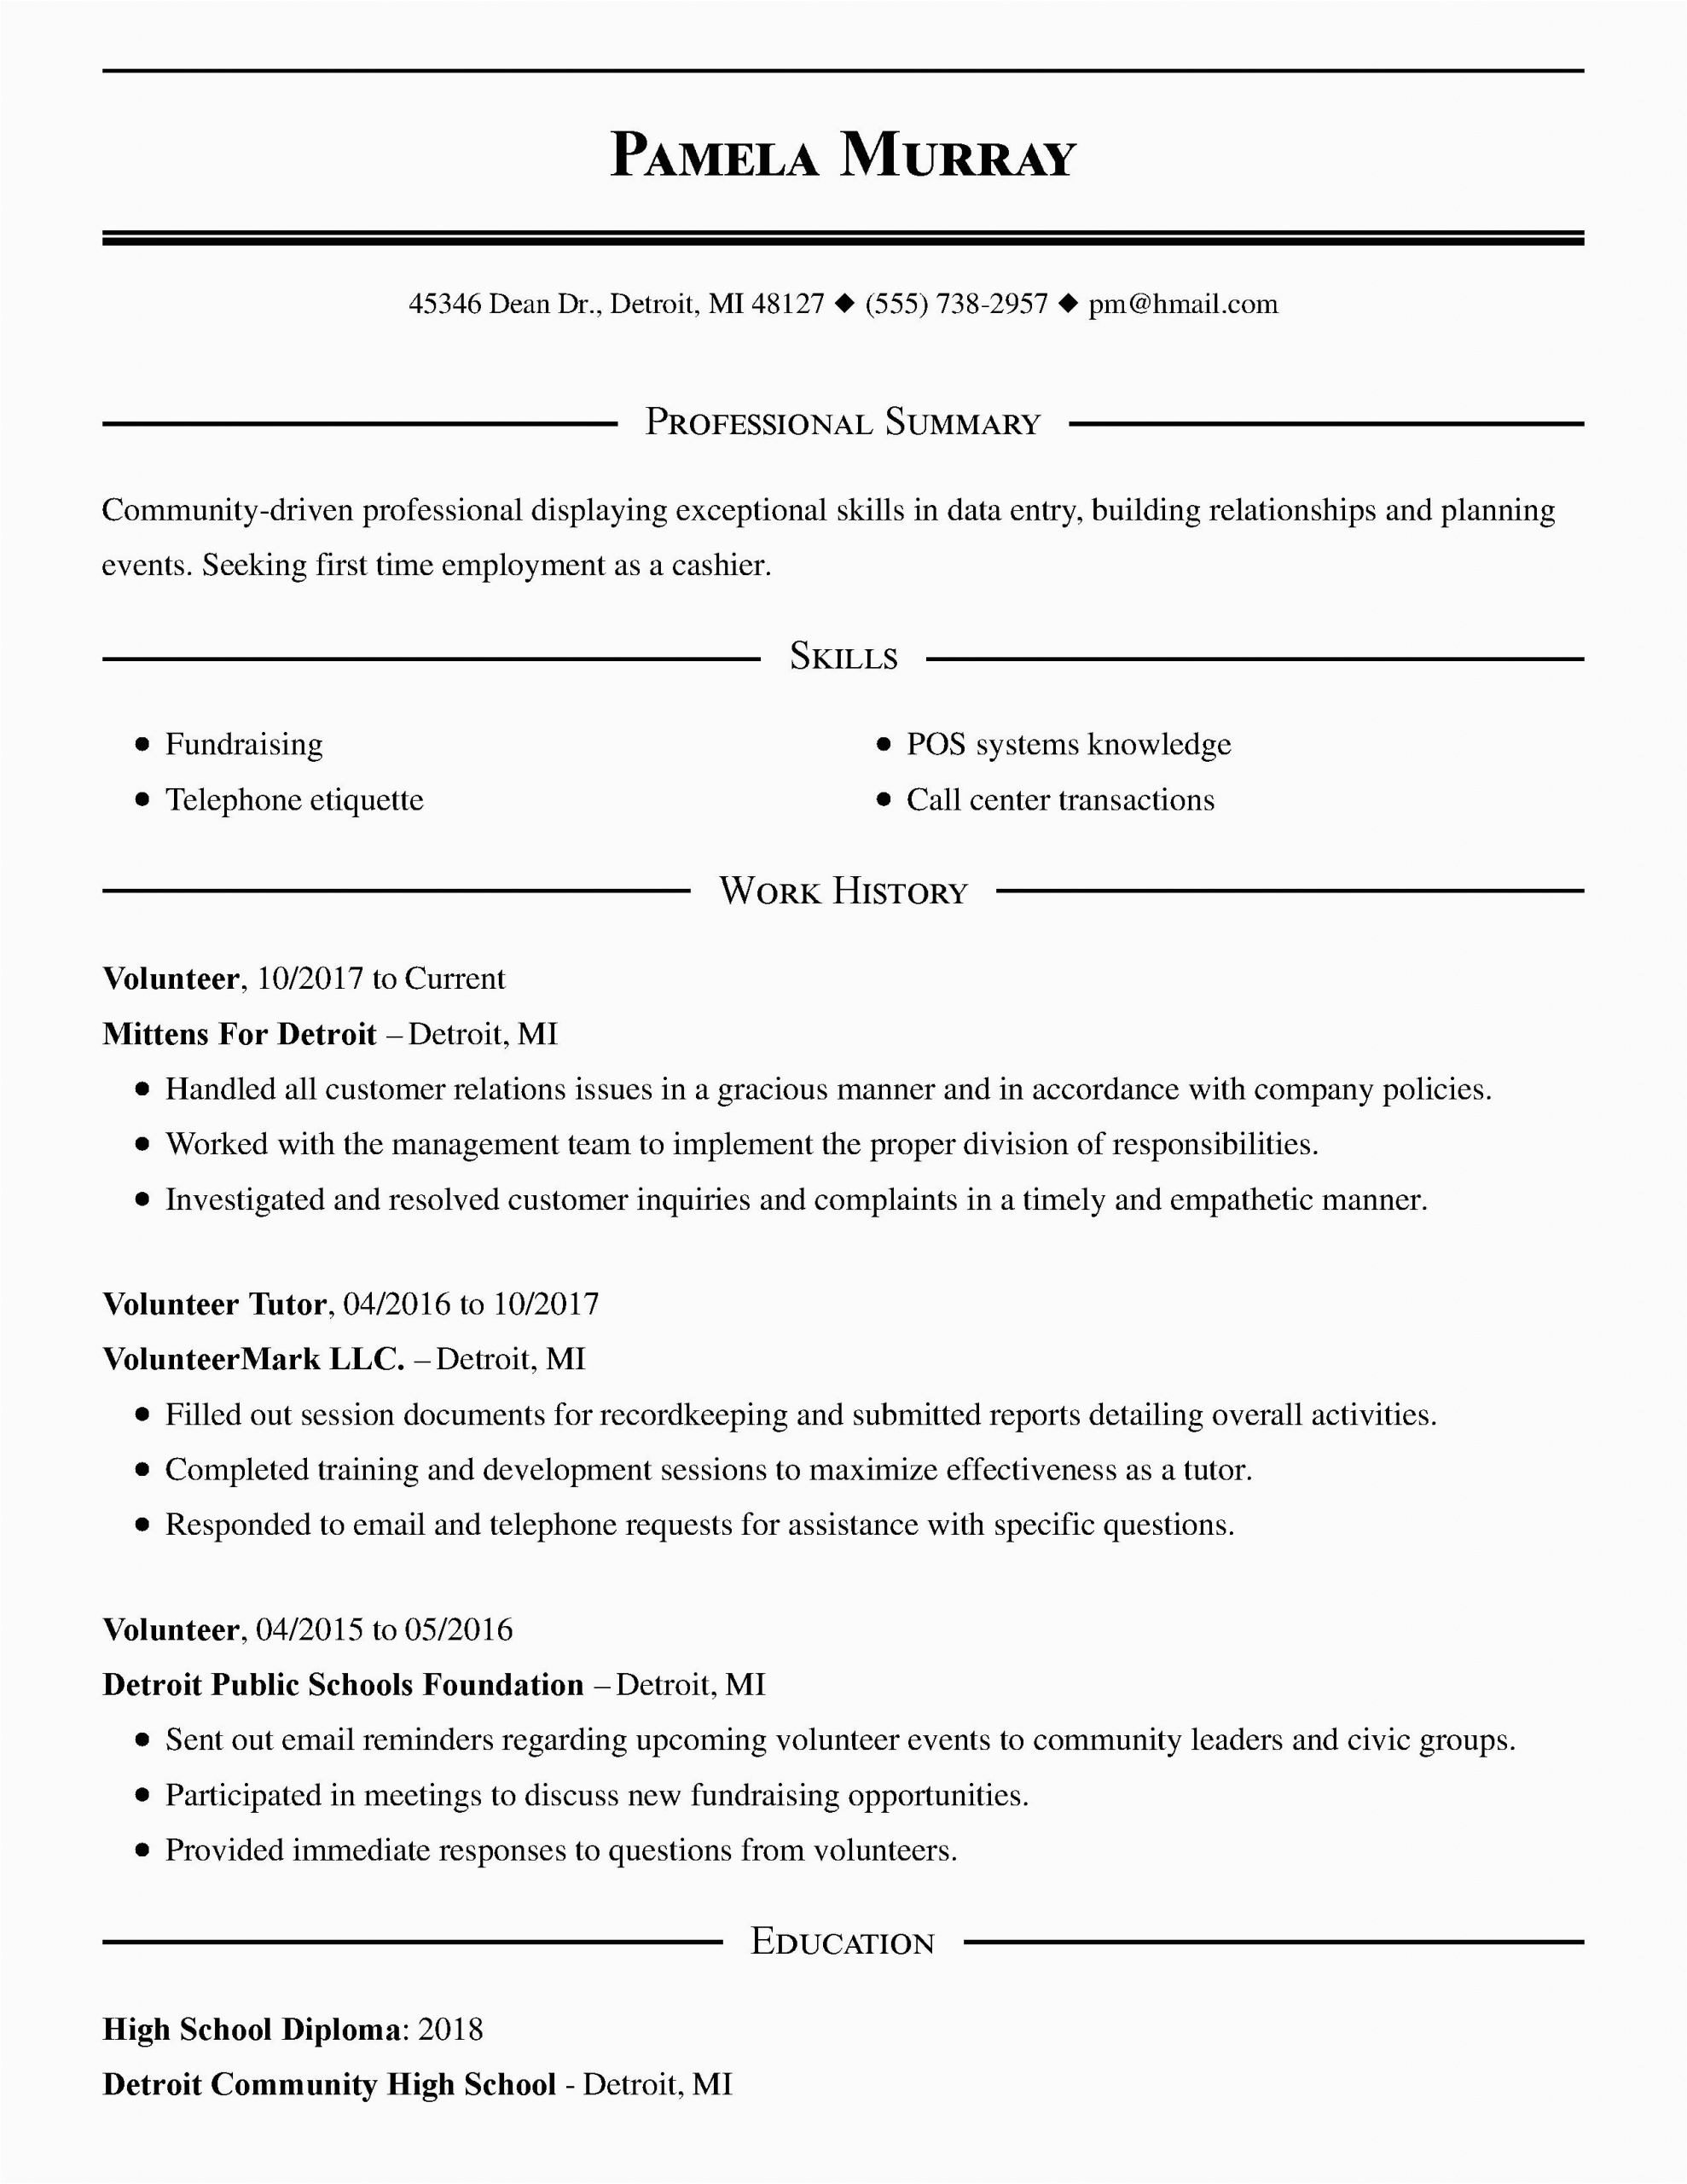 Sample Cashier Resume with No Experience View 30 Samples Of Resumes by Industry & Experience Level